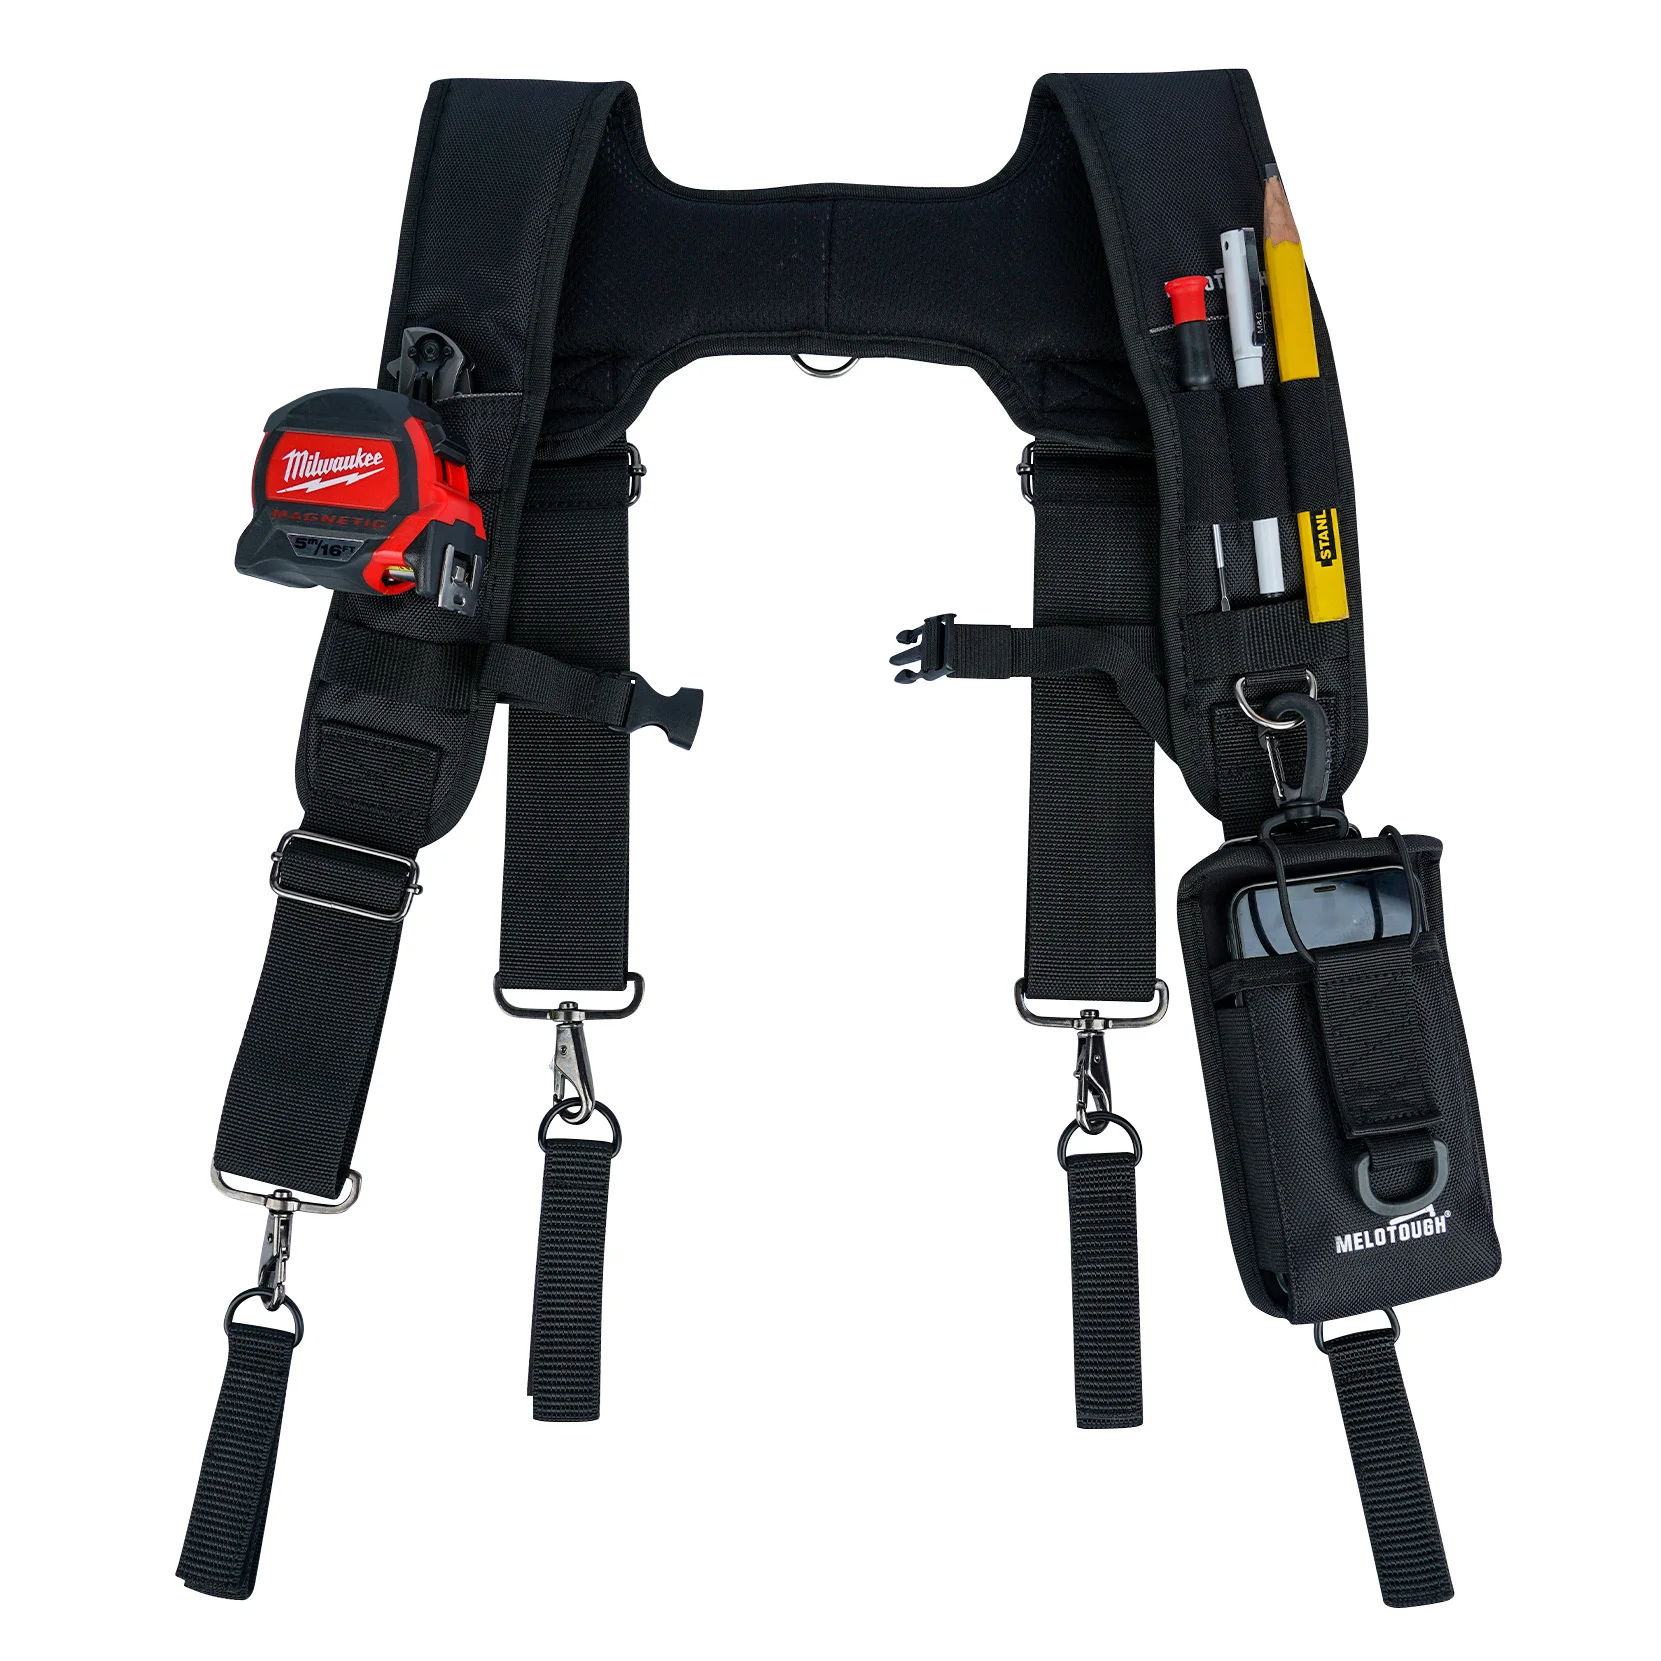 Melo Tough Padded Suspenders |Tool Belt Suspenders with Movable Phone Holder Tape Holder Pencil Holder Adjustable Straps, Suspenders Loop Heavy Duty